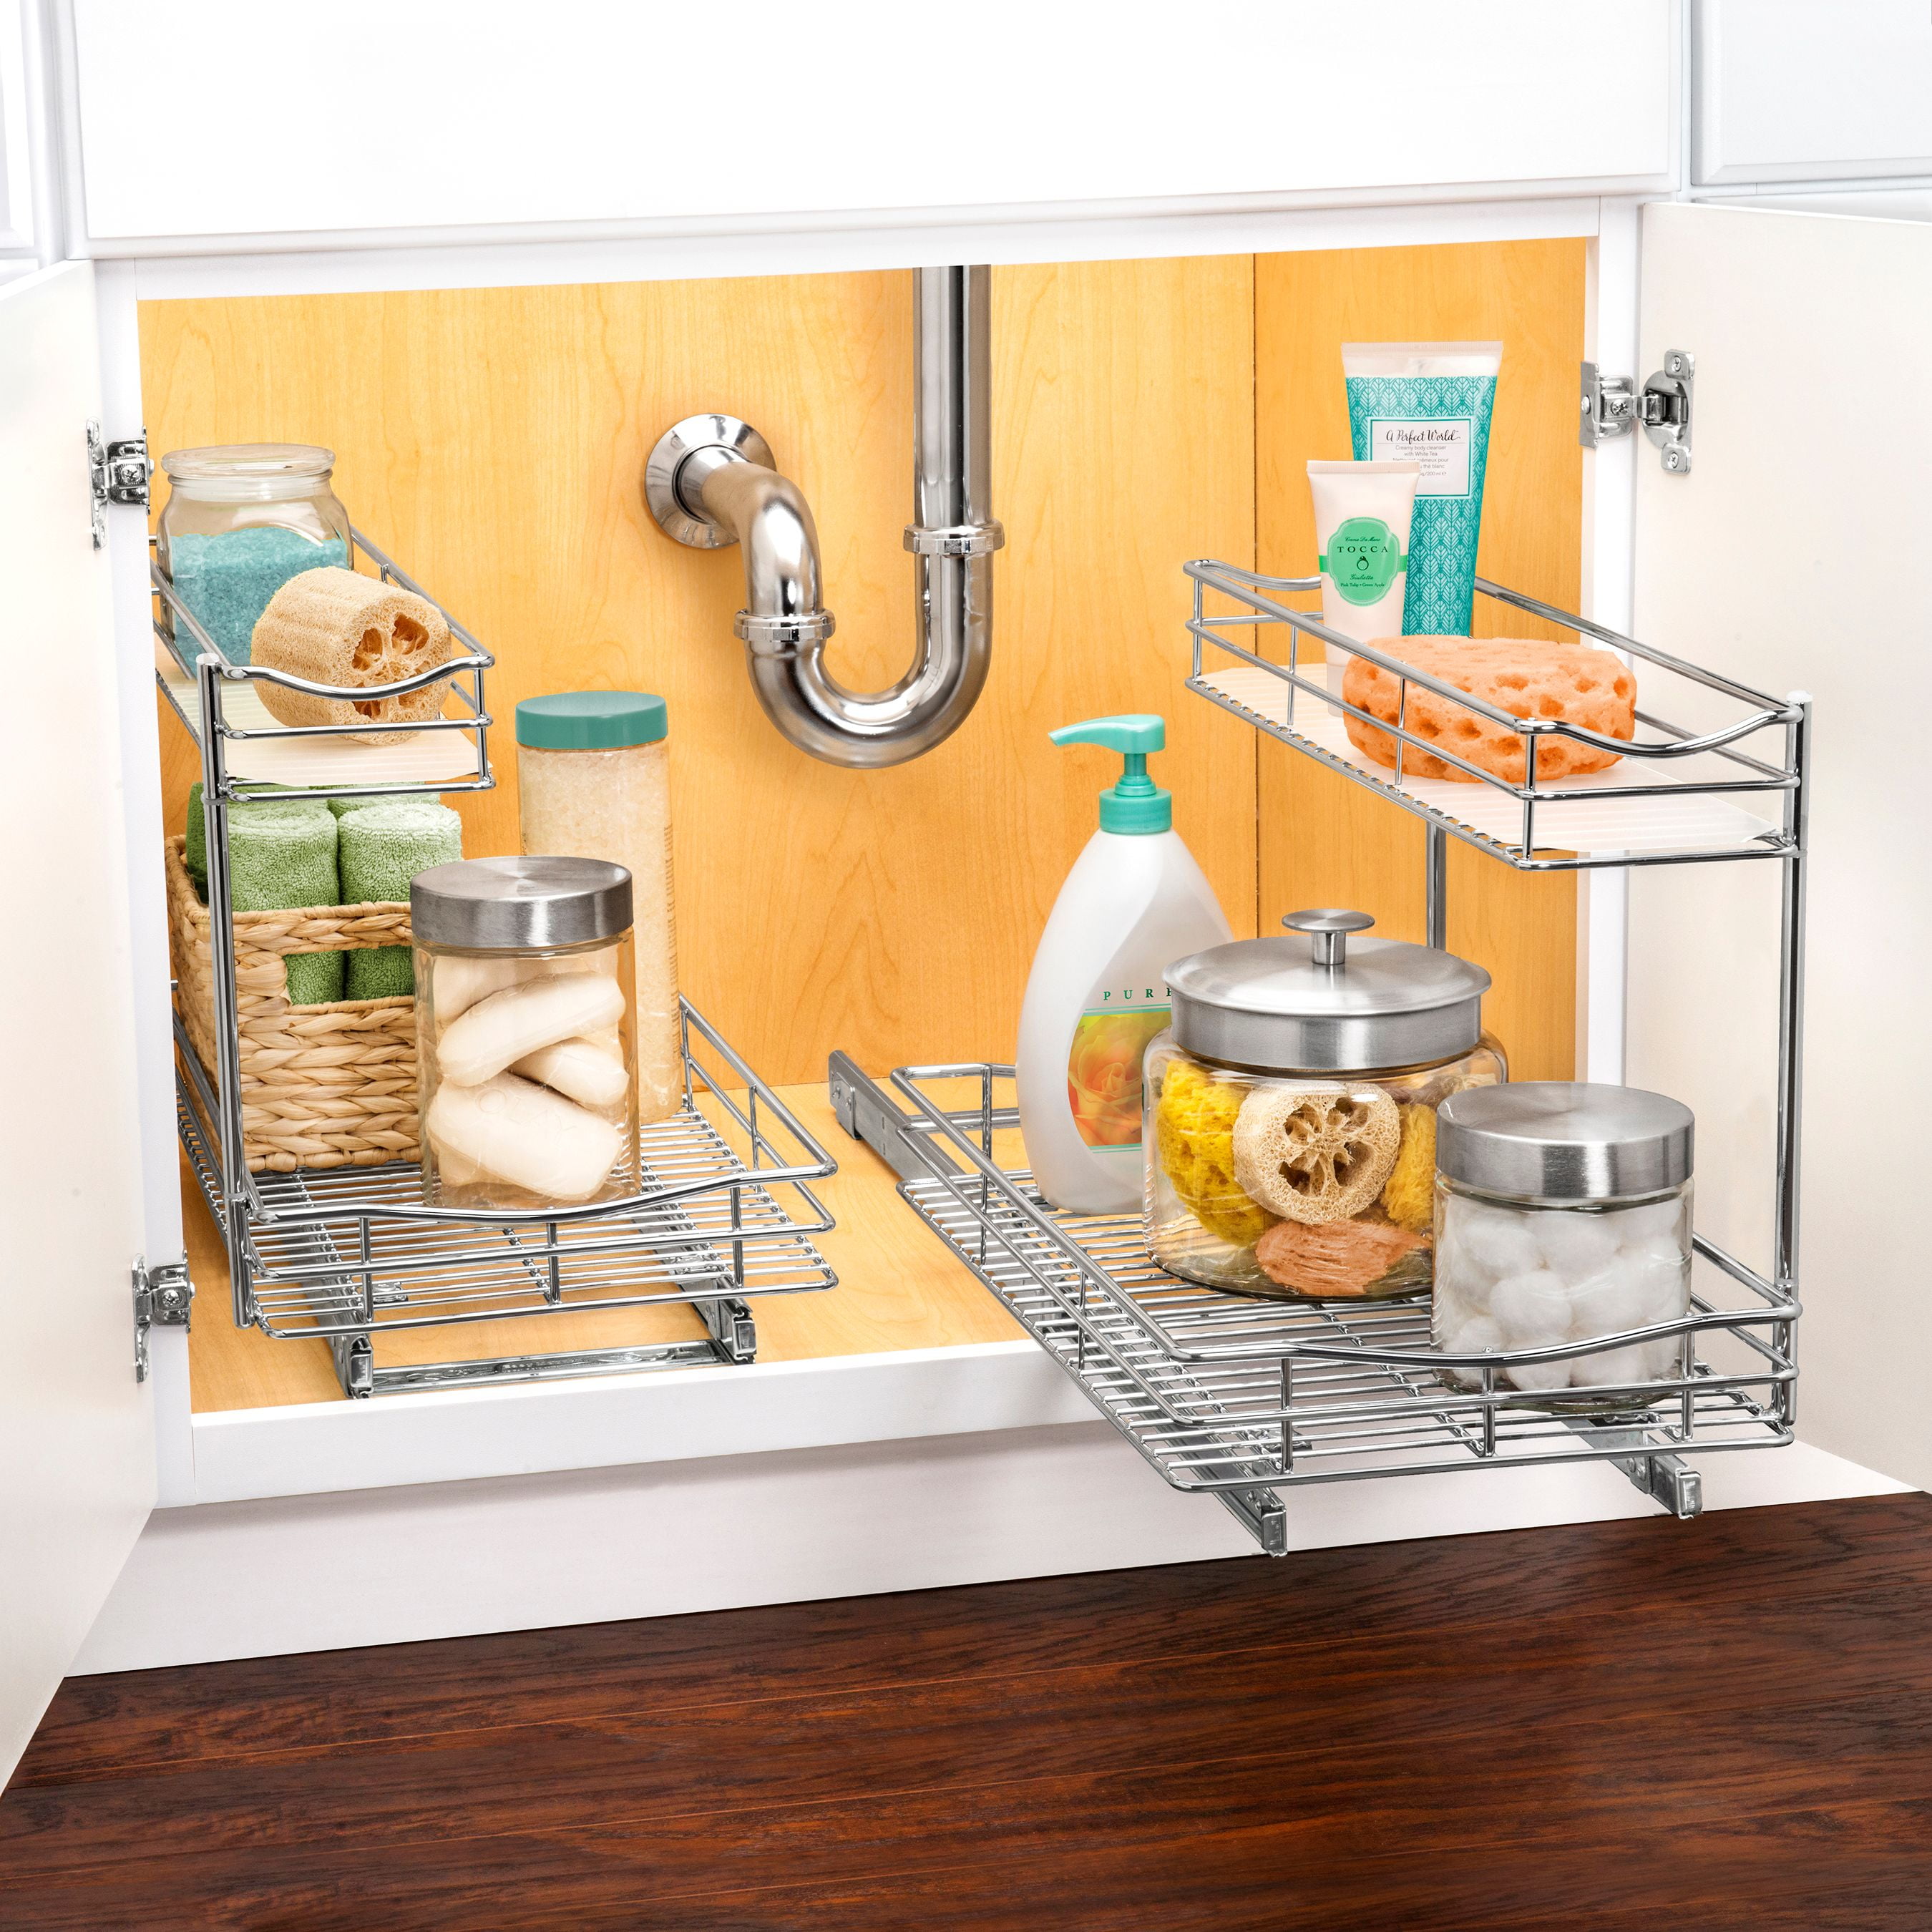 2 Tier Roll Out Sliding Shelves 9 W 18.5 D 16 H STORKING 2Pcs Under Sink Pull Out Cabinet Organizer Slide Wire Shelf Basket Perfect for Kitchen Base Cabinets 